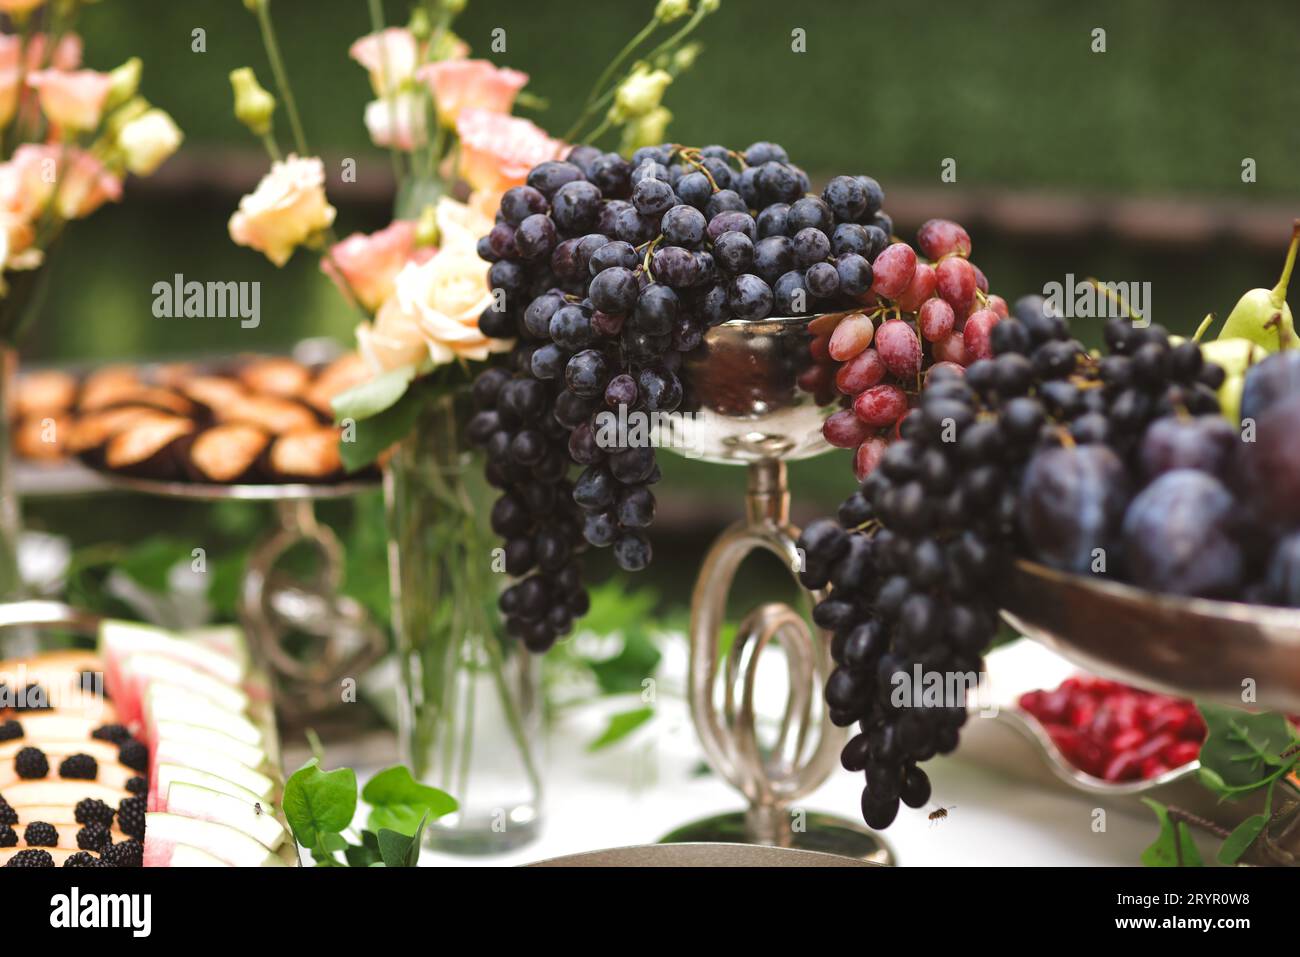 An array of silver dishes filled with purple grapes, each one topped with a colorful vase filled with blooming flowers Stock Photo